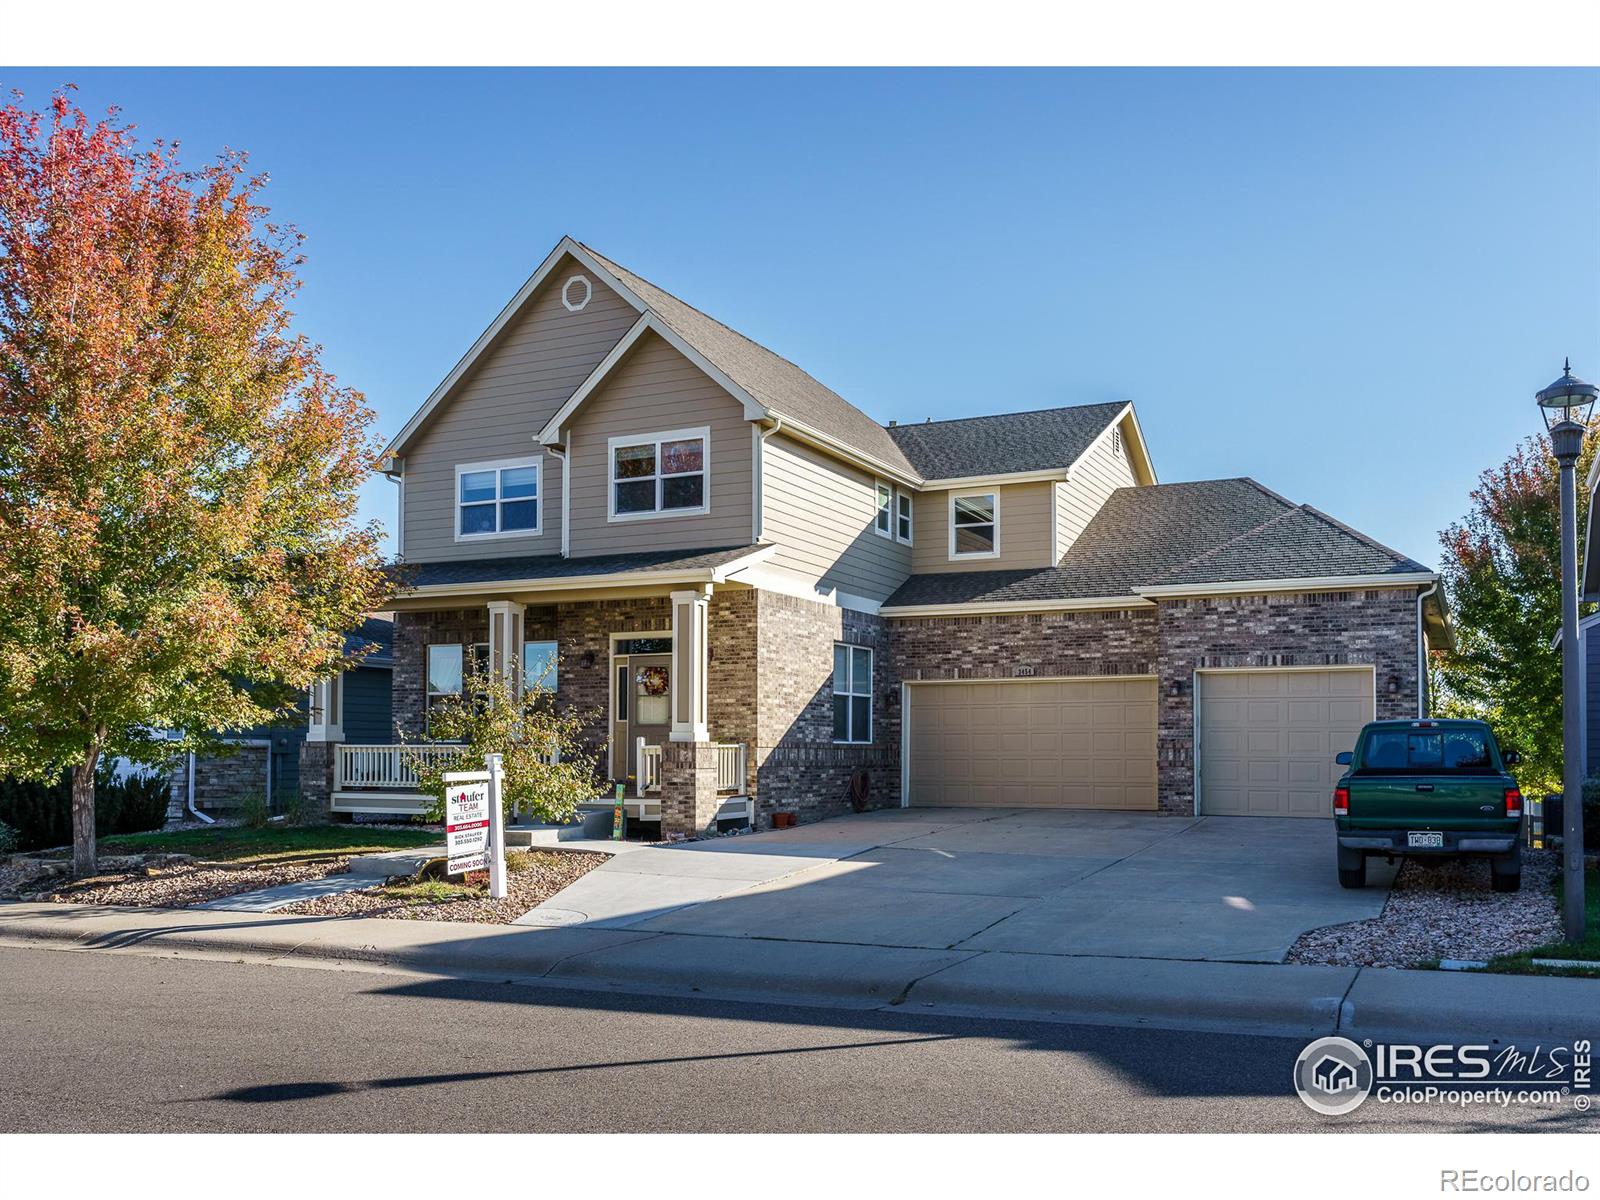 3454  new castle drive, Loveland sold home. Closed on 2024-02-08 for $775,000.